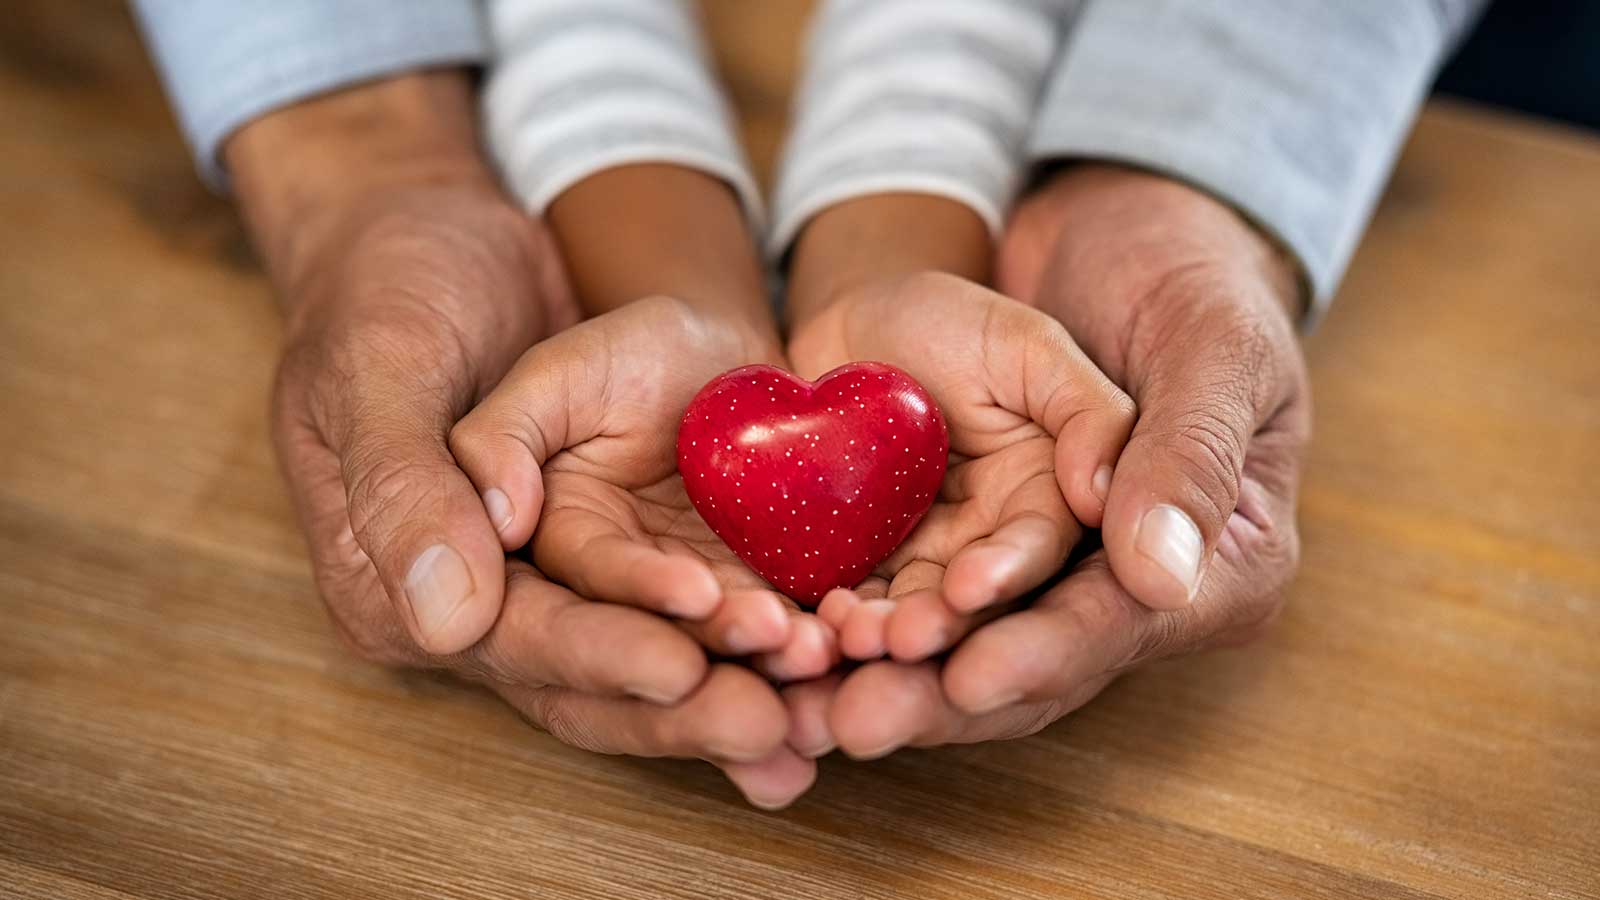 Adult hands holding child's hands holding a heart